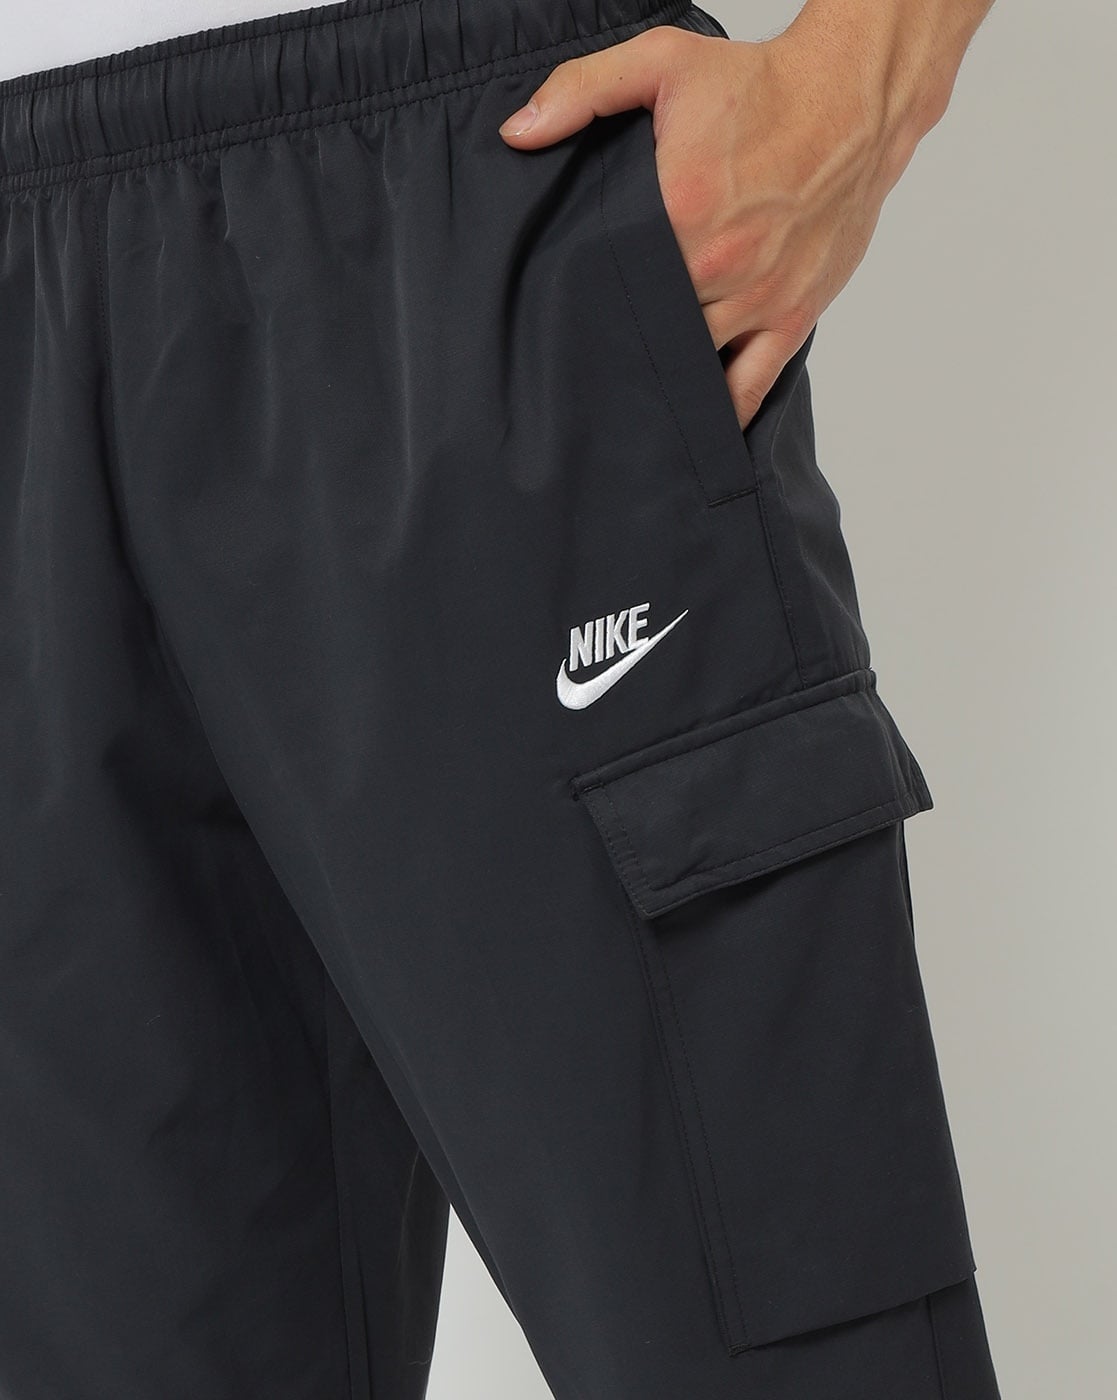 Nike Sportswear Style Essentials Mens Woven Unlined Cargo Pants 36  BlackSailIce Silver  Amazonin Clothing  Accessories